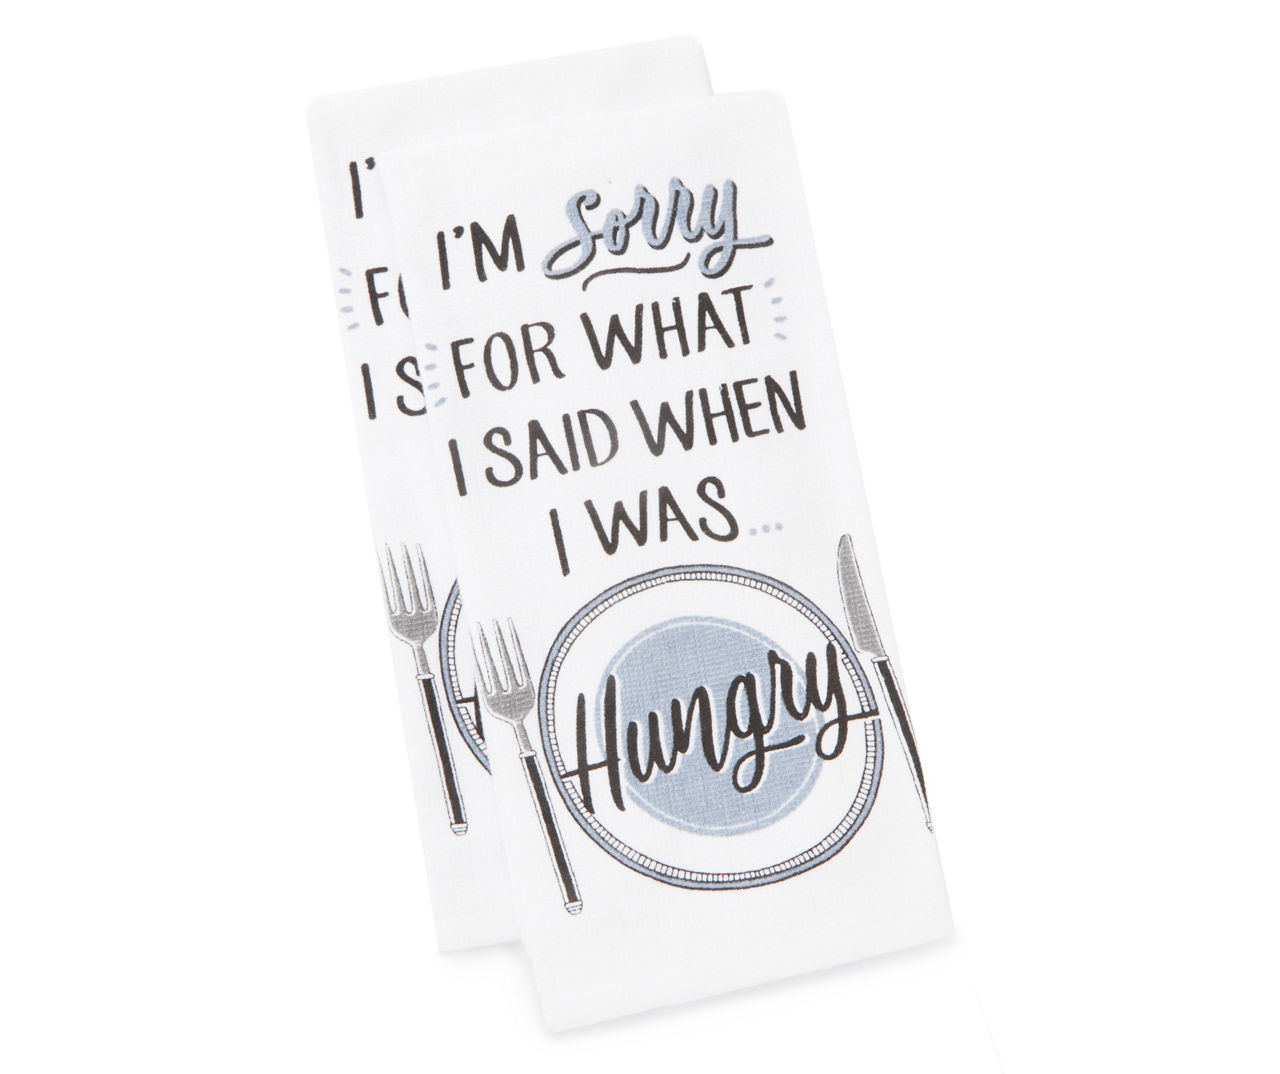 I'm Sorry for What I Said When I Was Hangry - Tea Towel